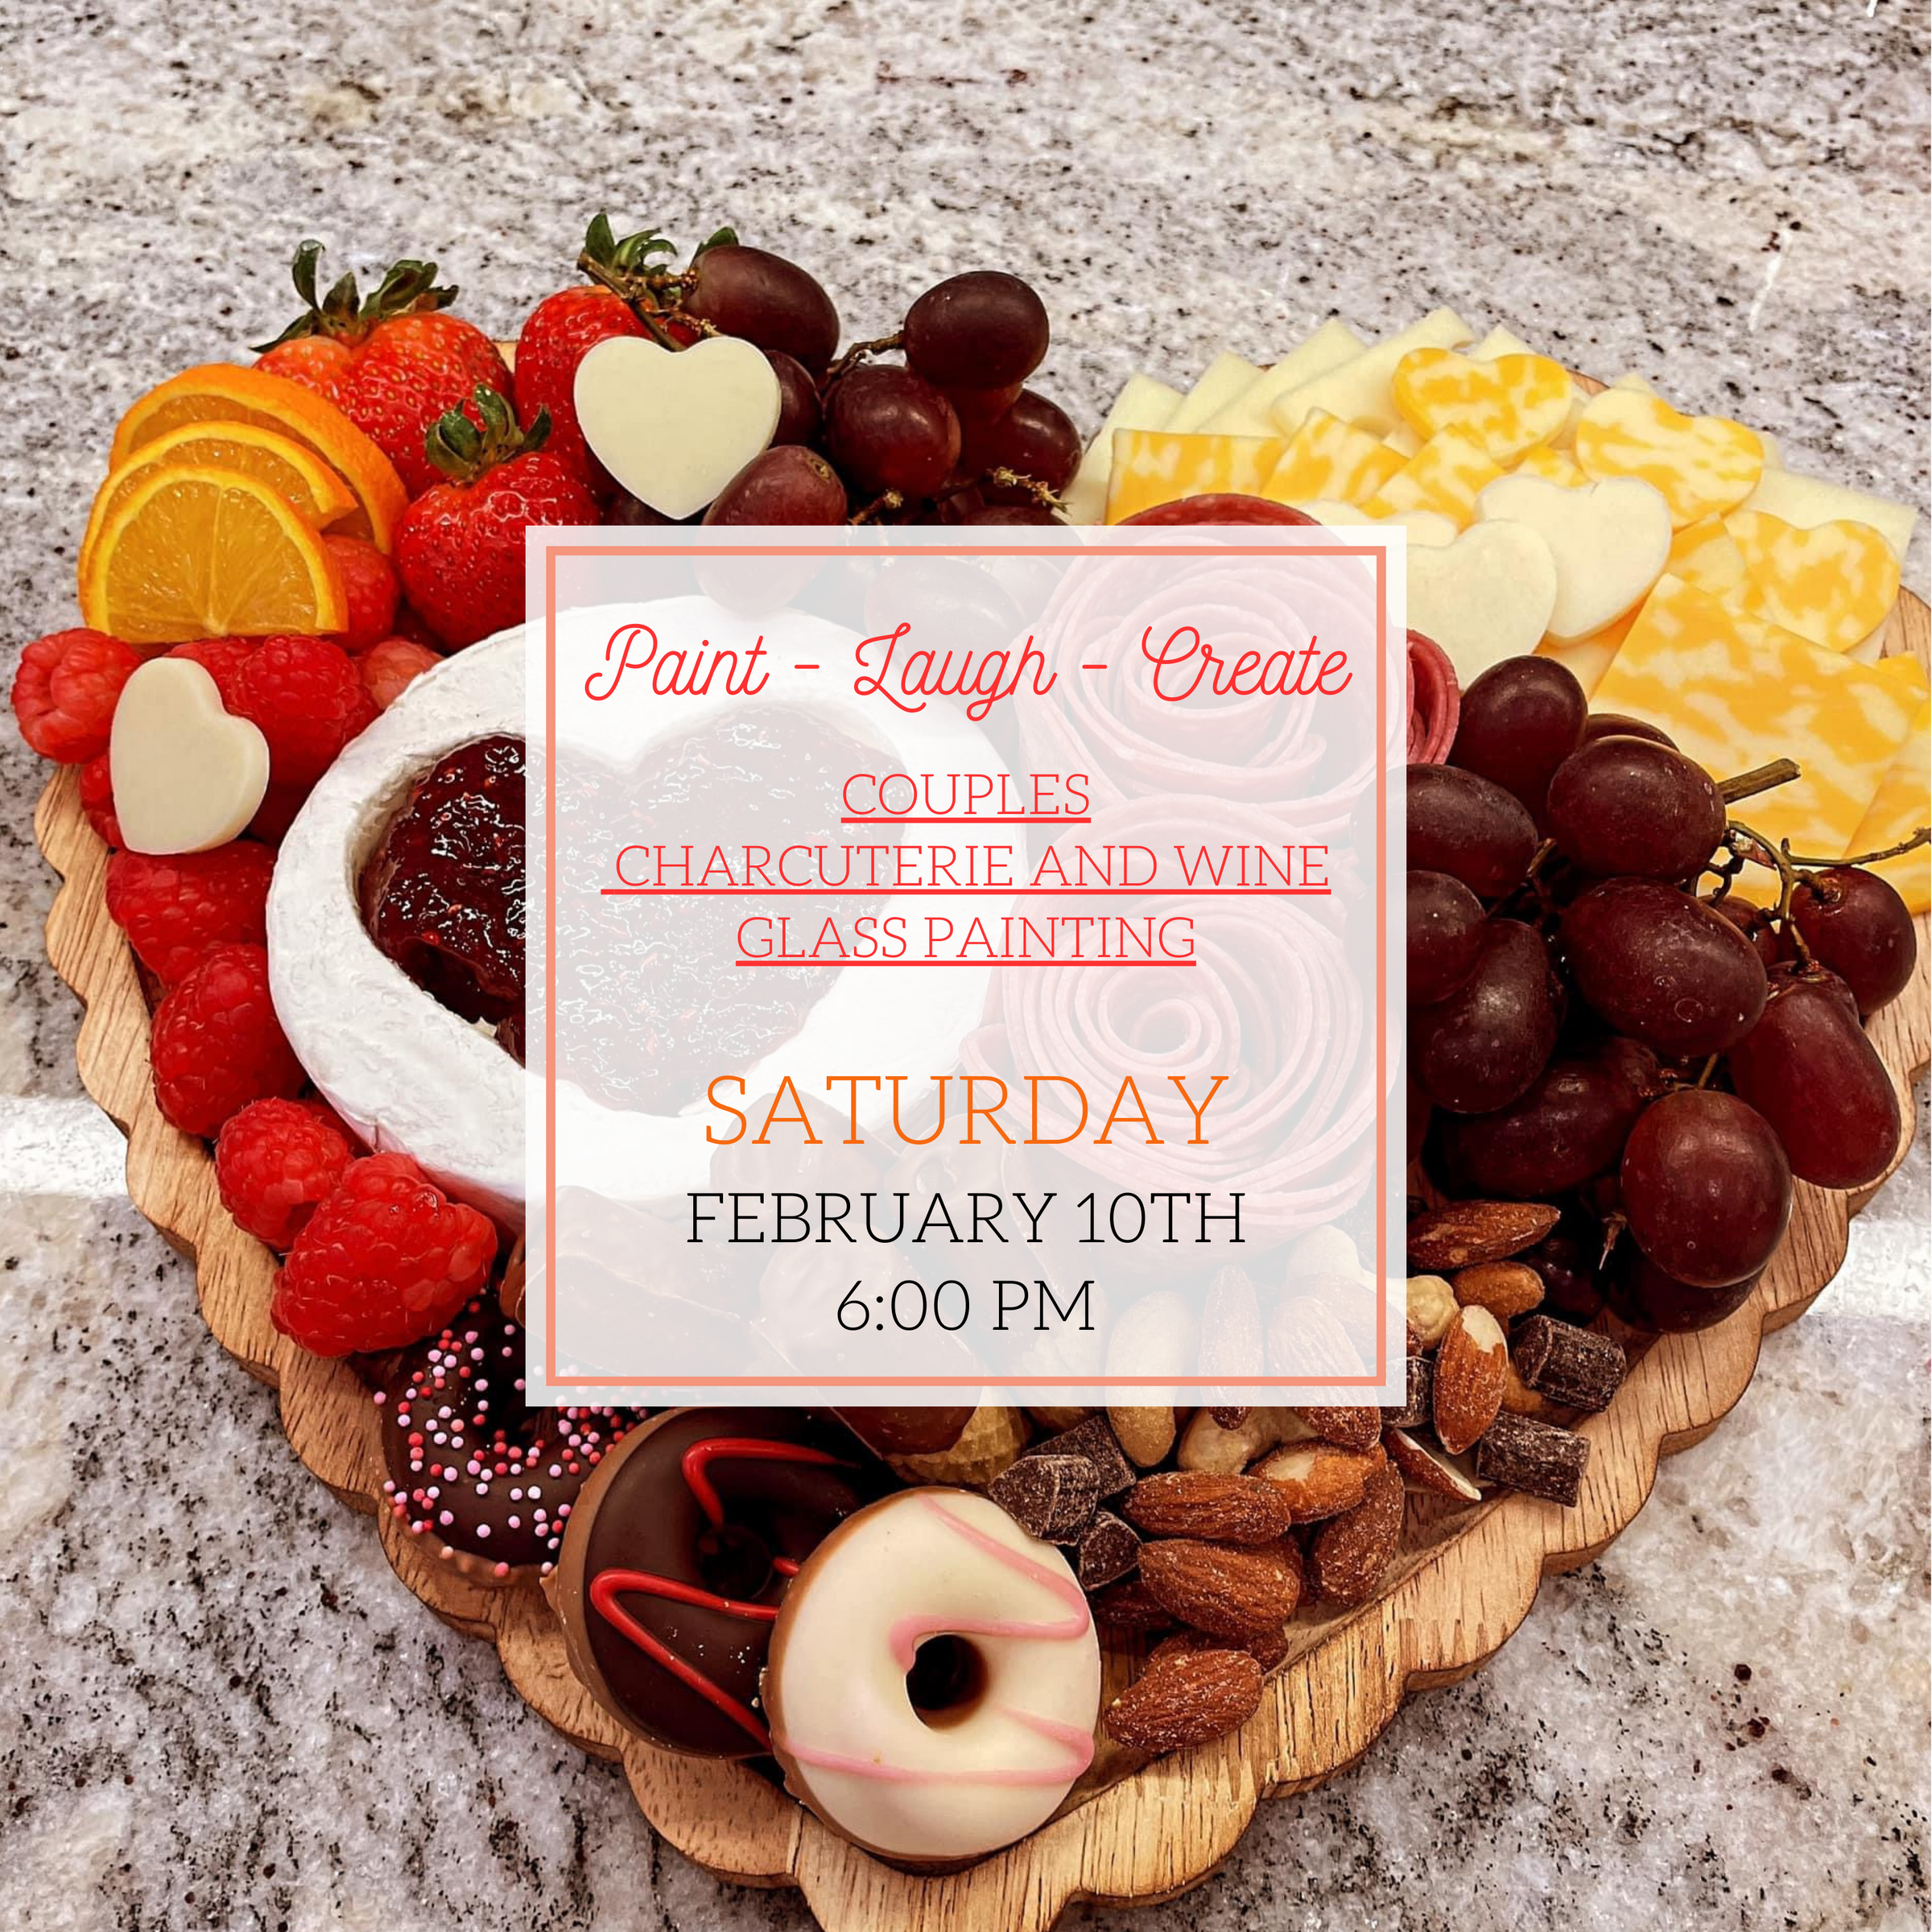 COUPLES VALENTINE'S CHARCUTERIE AND WINE GLASS PAINTING - FEB 10TH - 6:00PM